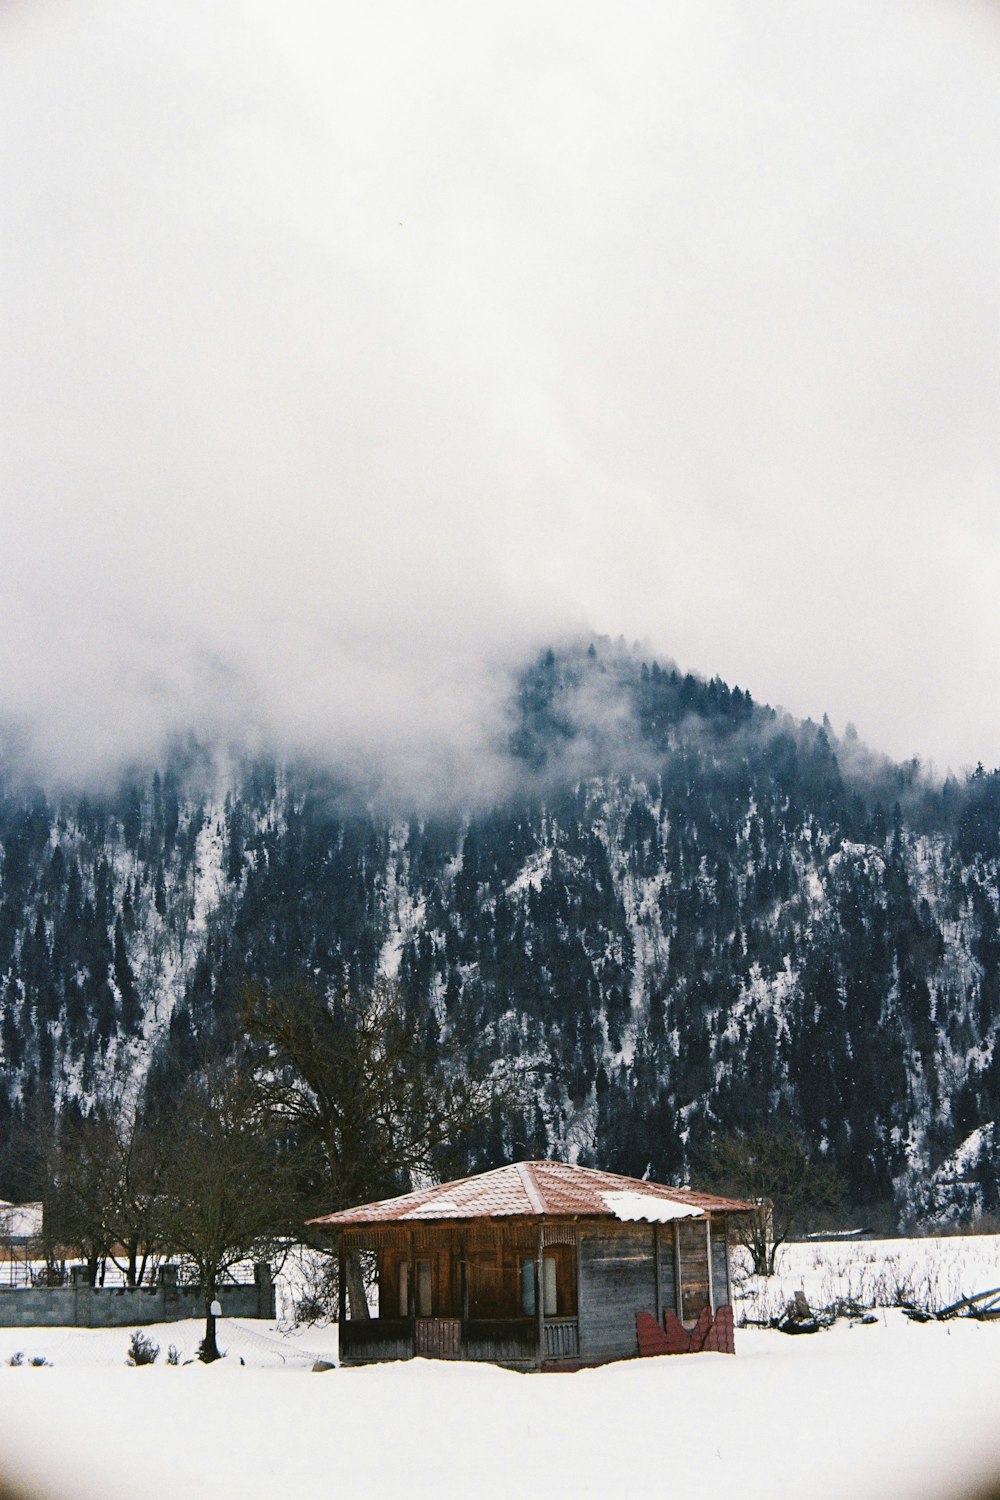 a snow covered mountain with a small cabin in the foreground